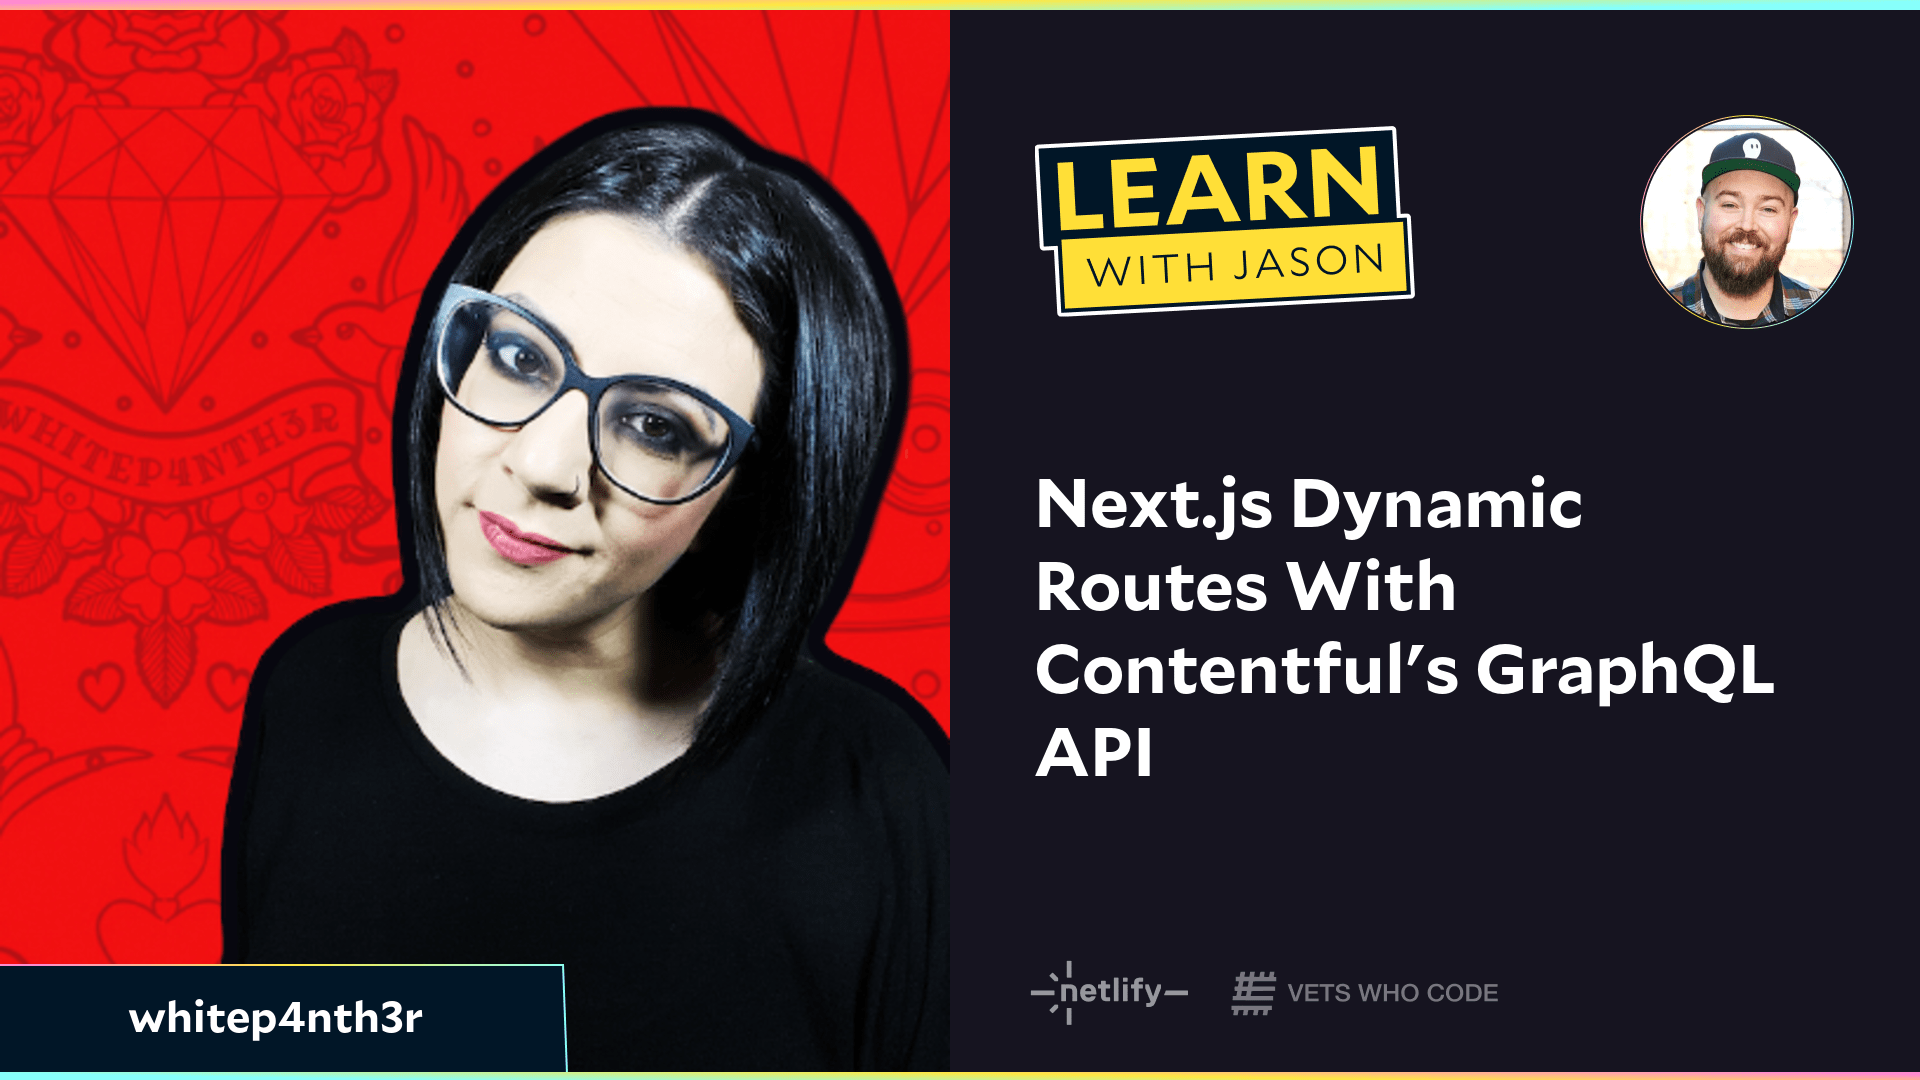 Next.js Dynamic Routes With Contentful's GraphQL API (with whitep4nth3r)